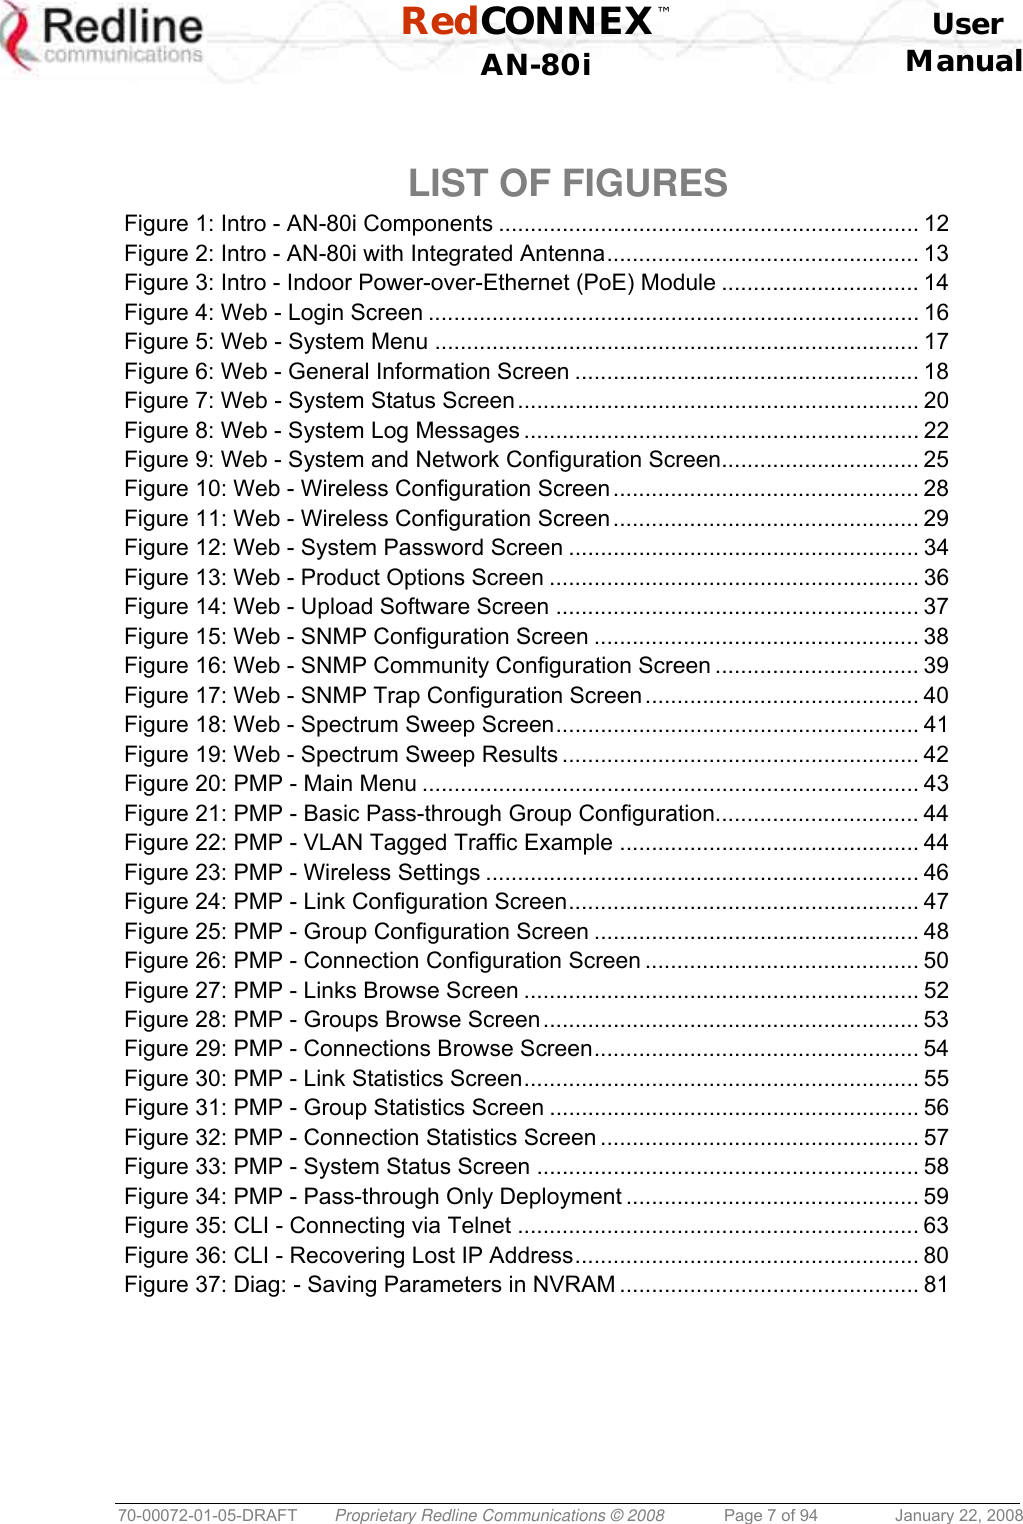  RedCONNEX™    User  AN-80i Manual  70-00072-01-05-DRAFT  Proprietary Redline Communications © 2008  Page 7 of 94  January 22, 2008   LIST OF FIGURES Figure 1: Intro - AN-80i Components .................................................................. 12 Figure 2: Intro - AN-80i with Integrated Antenna................................................. 13 Figure 3: Intro - Indoor Power-over-Ethernet (PoE) Module ............................... 14 Figure 4: Web - Login Screen ............................................................................. 16 Figure 5: Web - System Menu ............................................................................ 17 Figure 6: Web - General Information Screen ...................................................... 18 Figure 7: Web - System Status Screen............................................................... 20 Figure 8: Web - System Log Messages .............................................................. 22 Figure 9: Web - System and Network Configuration Screen............................... 25 Figure 10: Web - Wireless Configuration Screen................................................ 28 Figure 11: Web - Wireless Configuration Screen................................................ 29 Figure 12: Web - System Password Screen ....................................................... 34 Figure 13: Web - Product Options Screen .......................................................... 36 Figure 14: Web - Upload Software Screen ......................................................... 37 Figure 15: Web - SNMP Configuration Screen ................................................... 38 Figure 16: Web - SNMP Community Configuration Screen ................................ 39 Figure 17: Web - SNMP Trap Configuration Screen........................................... 40 Figure 18: Web - Spectrum Sweep Screen......................................................... 41 Figure 19: Web - Spectrum Sweep Results ........................................................ 42 Figure 20: PMP - Main Menu .............................................................................. 43 Figure 21: PMP - Basic Pass-through Group Configuration................................ 44 Figure 22: PMP - VLAN Tagged Traffic Example ............................................... 44 Figure 23: PMP - Wireless Settings .................................................................... 46 Figure 24: PMP - Link Configuration Screen....................................................... 47 Figure 25: PMP - Group Configuration Screen ................................................... 48 Figure 26: PMP - Connection Configuration Screen ........................................... 50 Figure 27: PMP - Links Browse Screen .............................................................. 52 Figure 28: PMP - Groups Browse Screen........................................................... 53 Figure 29: PMP - Connections Browse Screen................................................... 54 Figure 30: PMP - Link Statistics Screen.............................................................. 55 Figure 31: PMP - Group Statistics Screen .......................................................... 56 Figure 32: PMP - Connection Statistics Screen .................................................. 57 Figure 33: PMP - System Status Screen ............................................................ 58 Figure 34: PMP - Pass-through Only Deployment .............................................. 59 Figure 35: CLI - Connecting via Telnet ............................................................... 63 Figure 36: CLI - Recovering Lost IP Address...................................................... 80 Figure 37: Diag: - Saving Parameters in NVRAM ............................................... 81    